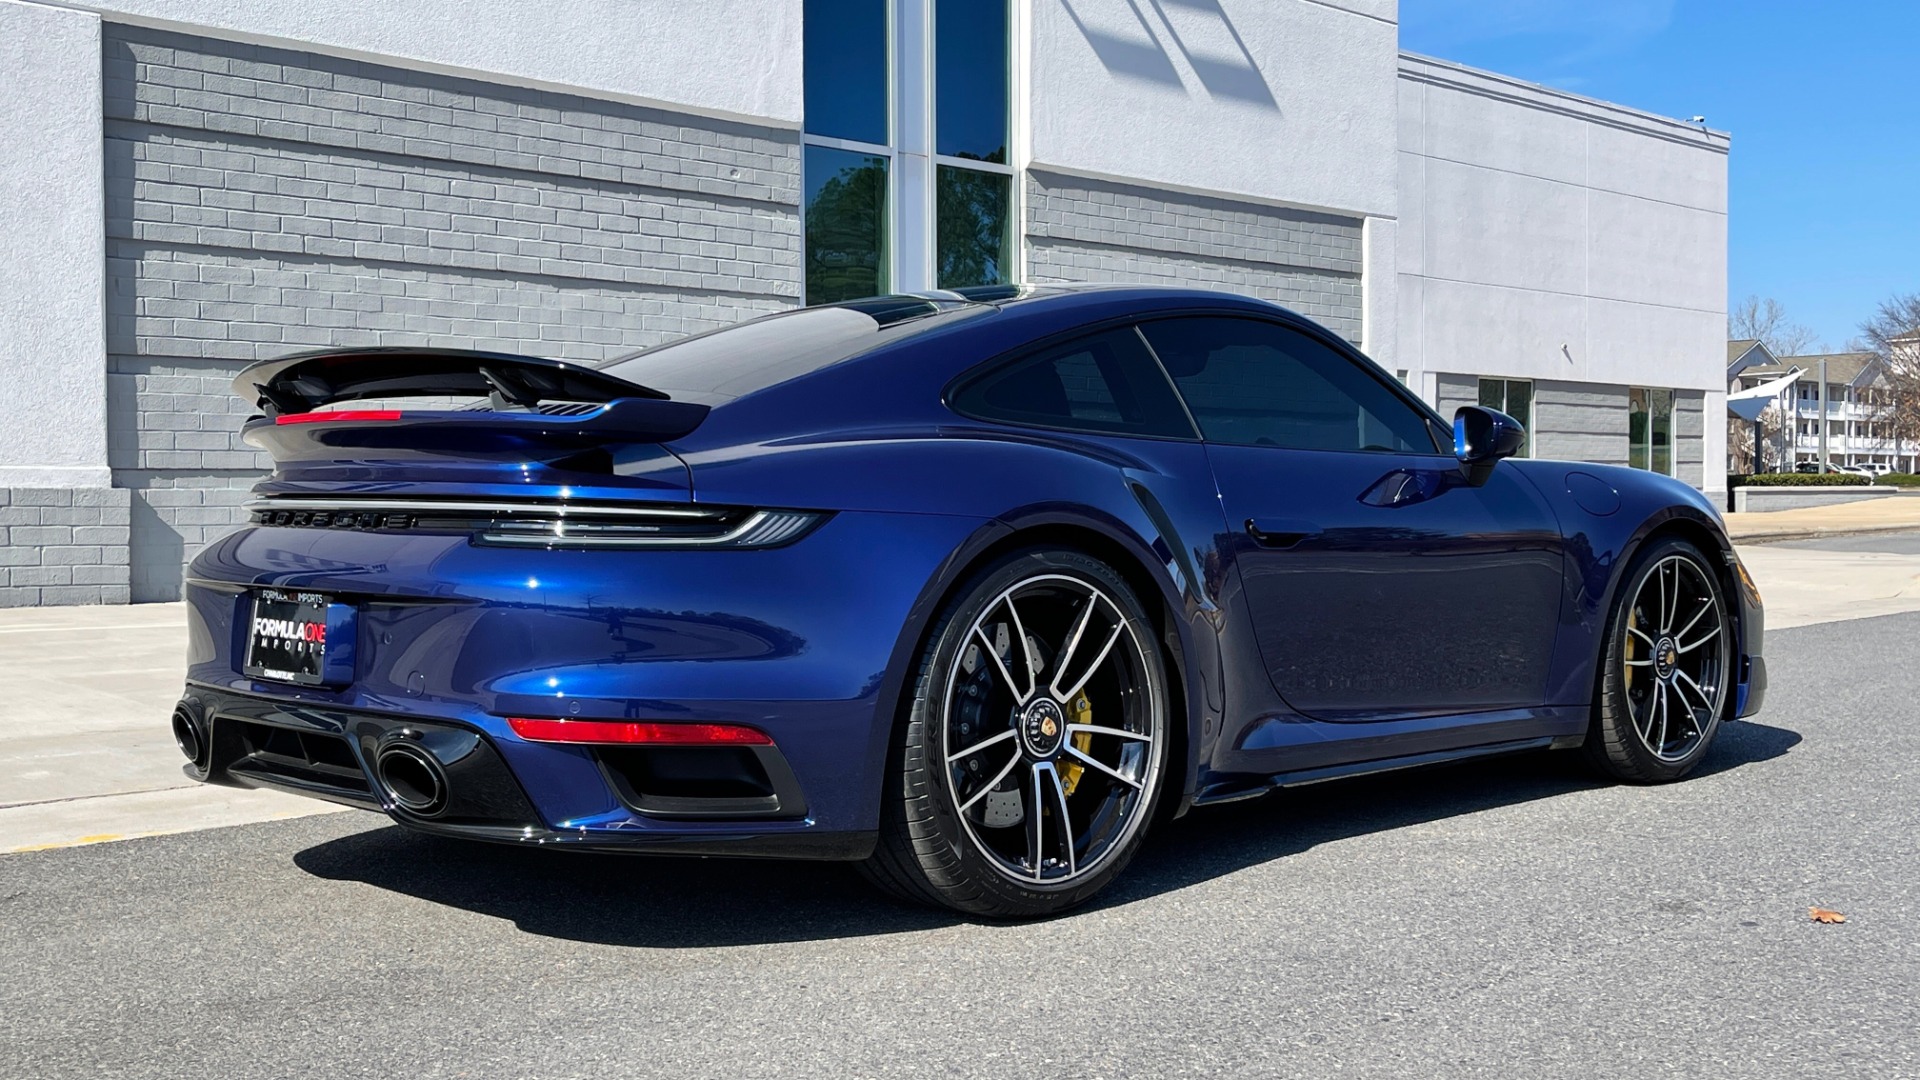 Used 2021 Porsche 911 TURBO S COUPE 3.8L / AWD / AUTO / NAV / SUNROOF / BOSE / REARVIEW for sale Sold at Formula Imports in Charlotte NC 28227 11